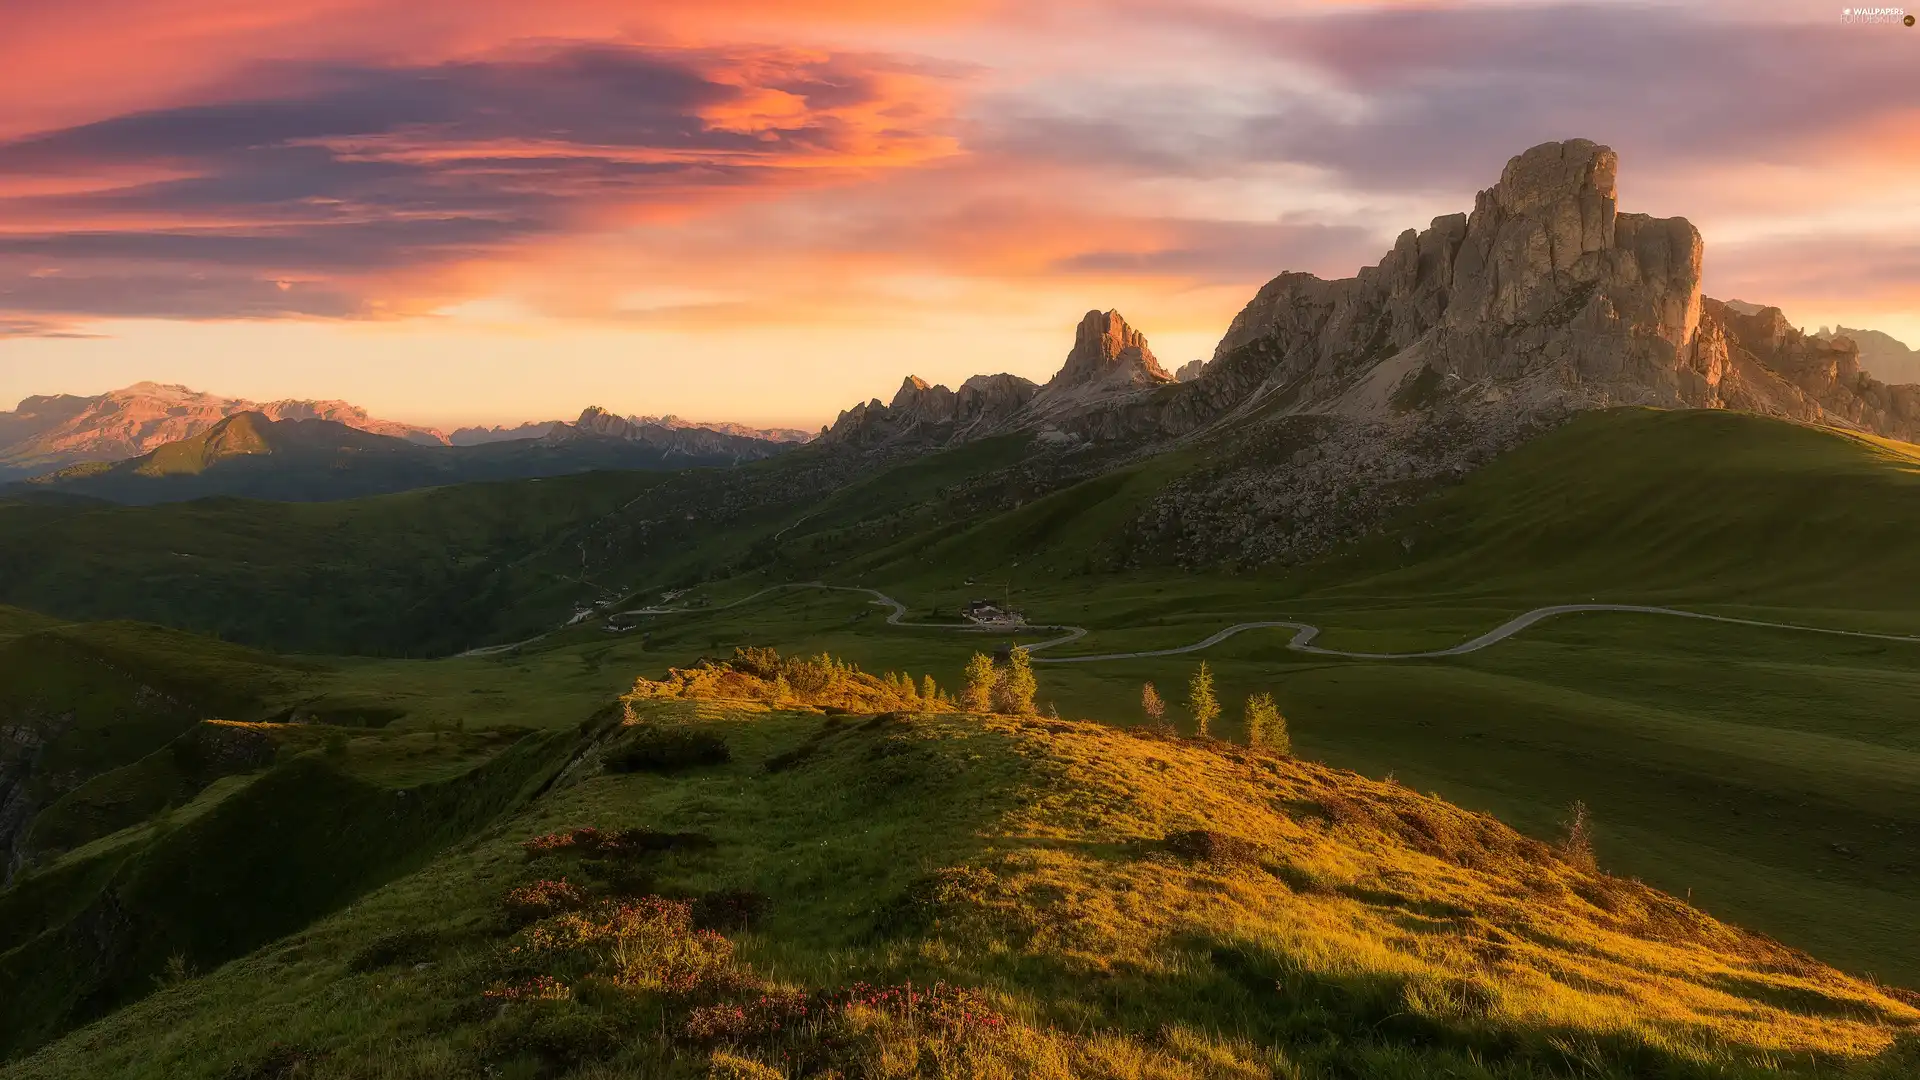 Mountains, Dolomites, winding, Hill, Meadow, Italy, Province of Belluno, Passo di Giau, pass, Great Sunsets, Way